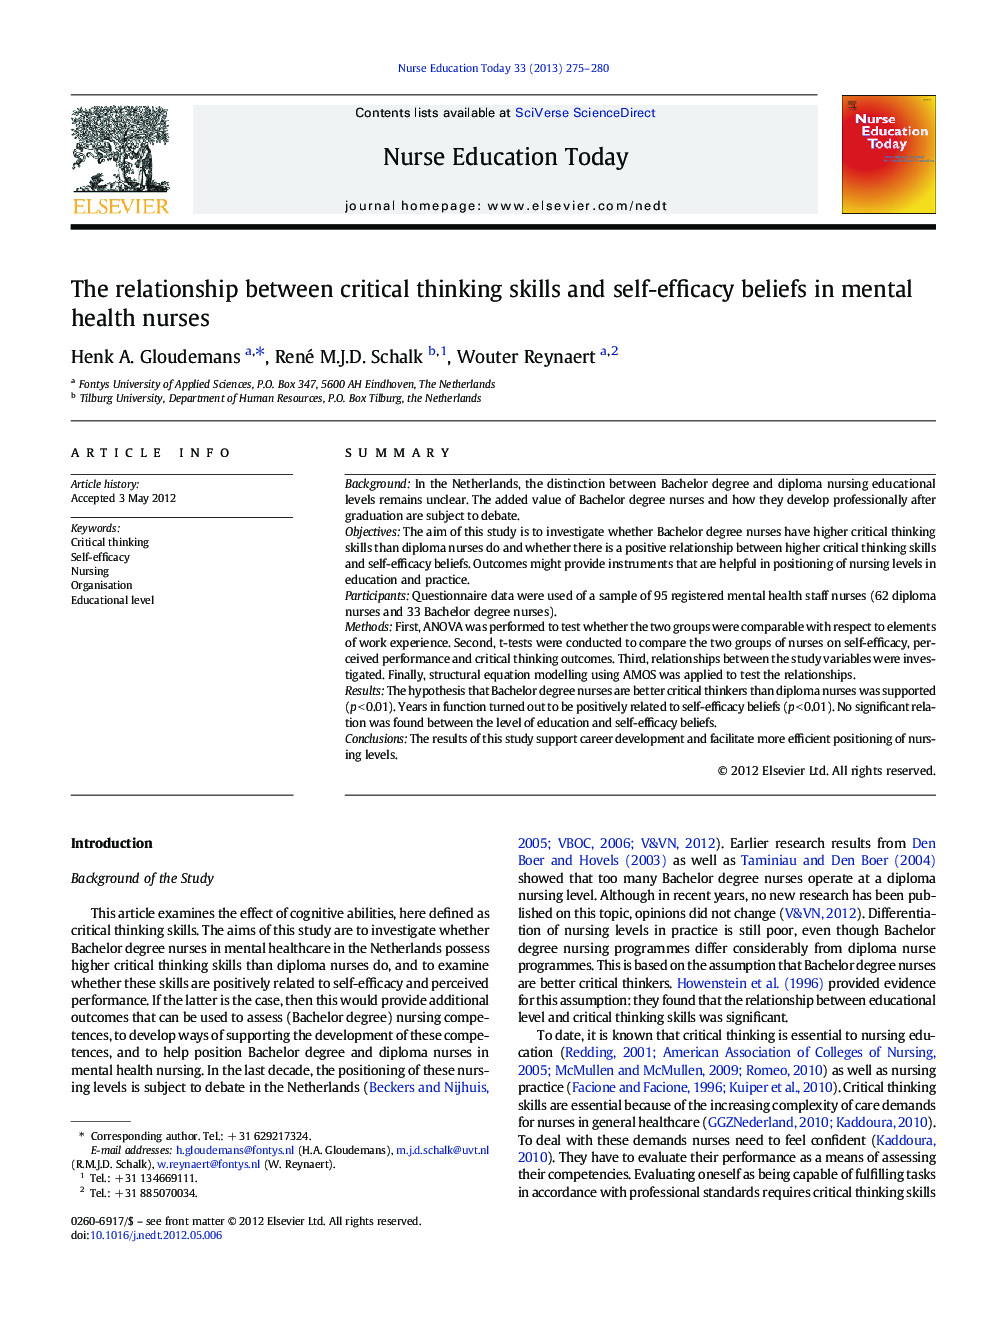 The relationship between critical thinking skills and self-efficacy beliefs in mental health nurses